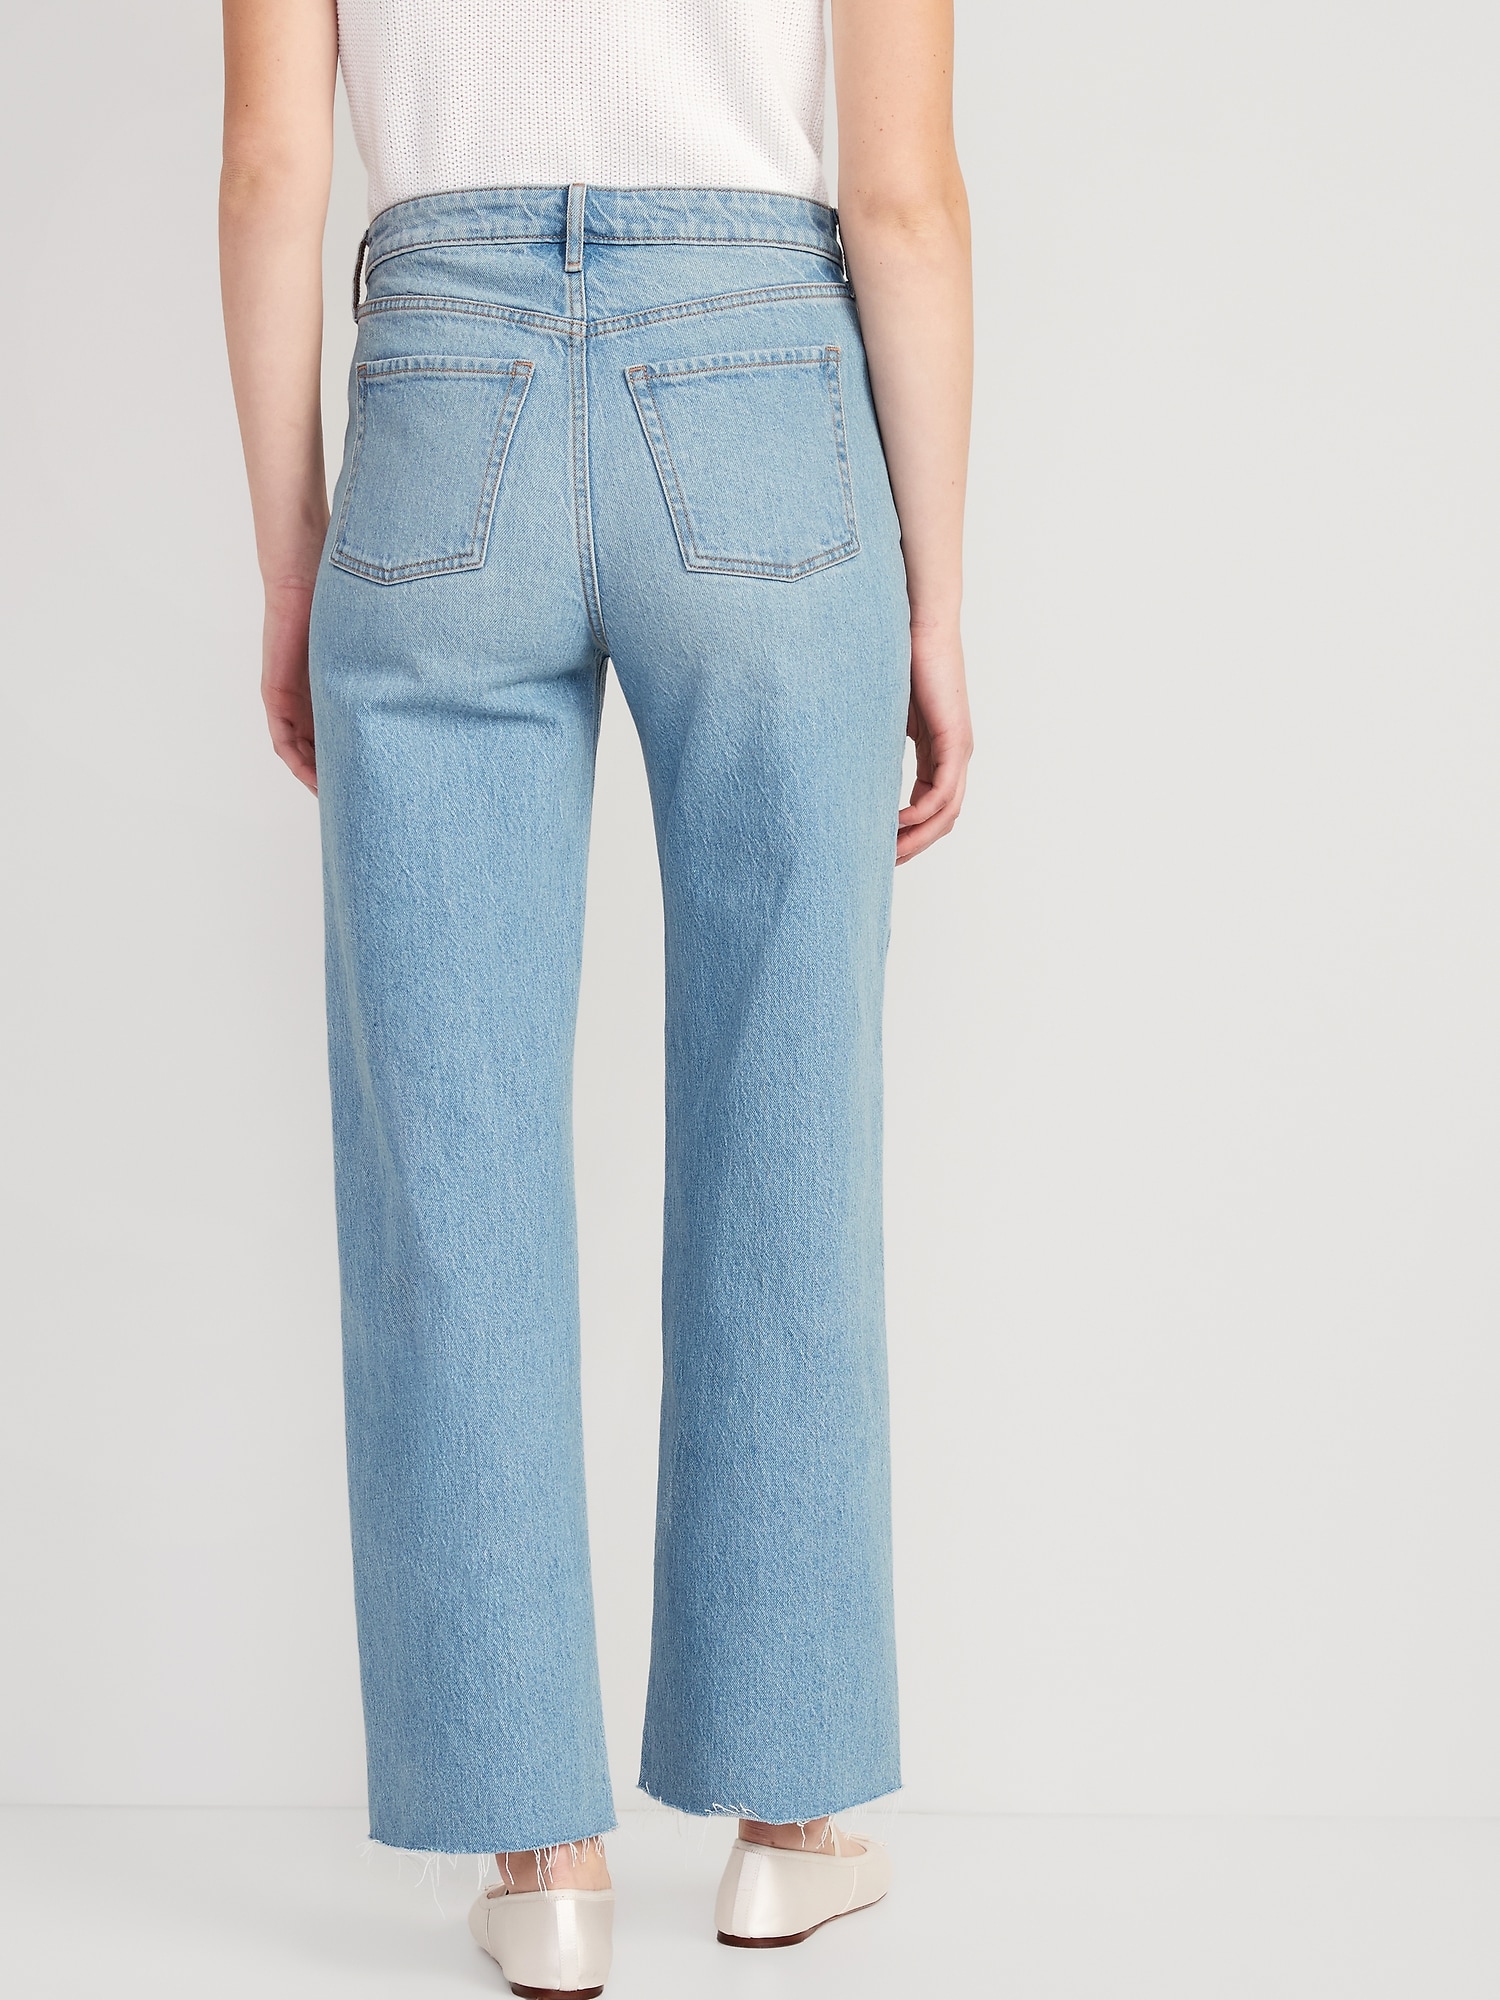 Old Navy Women's Extra High-Waisted Wide-Leg Jeans